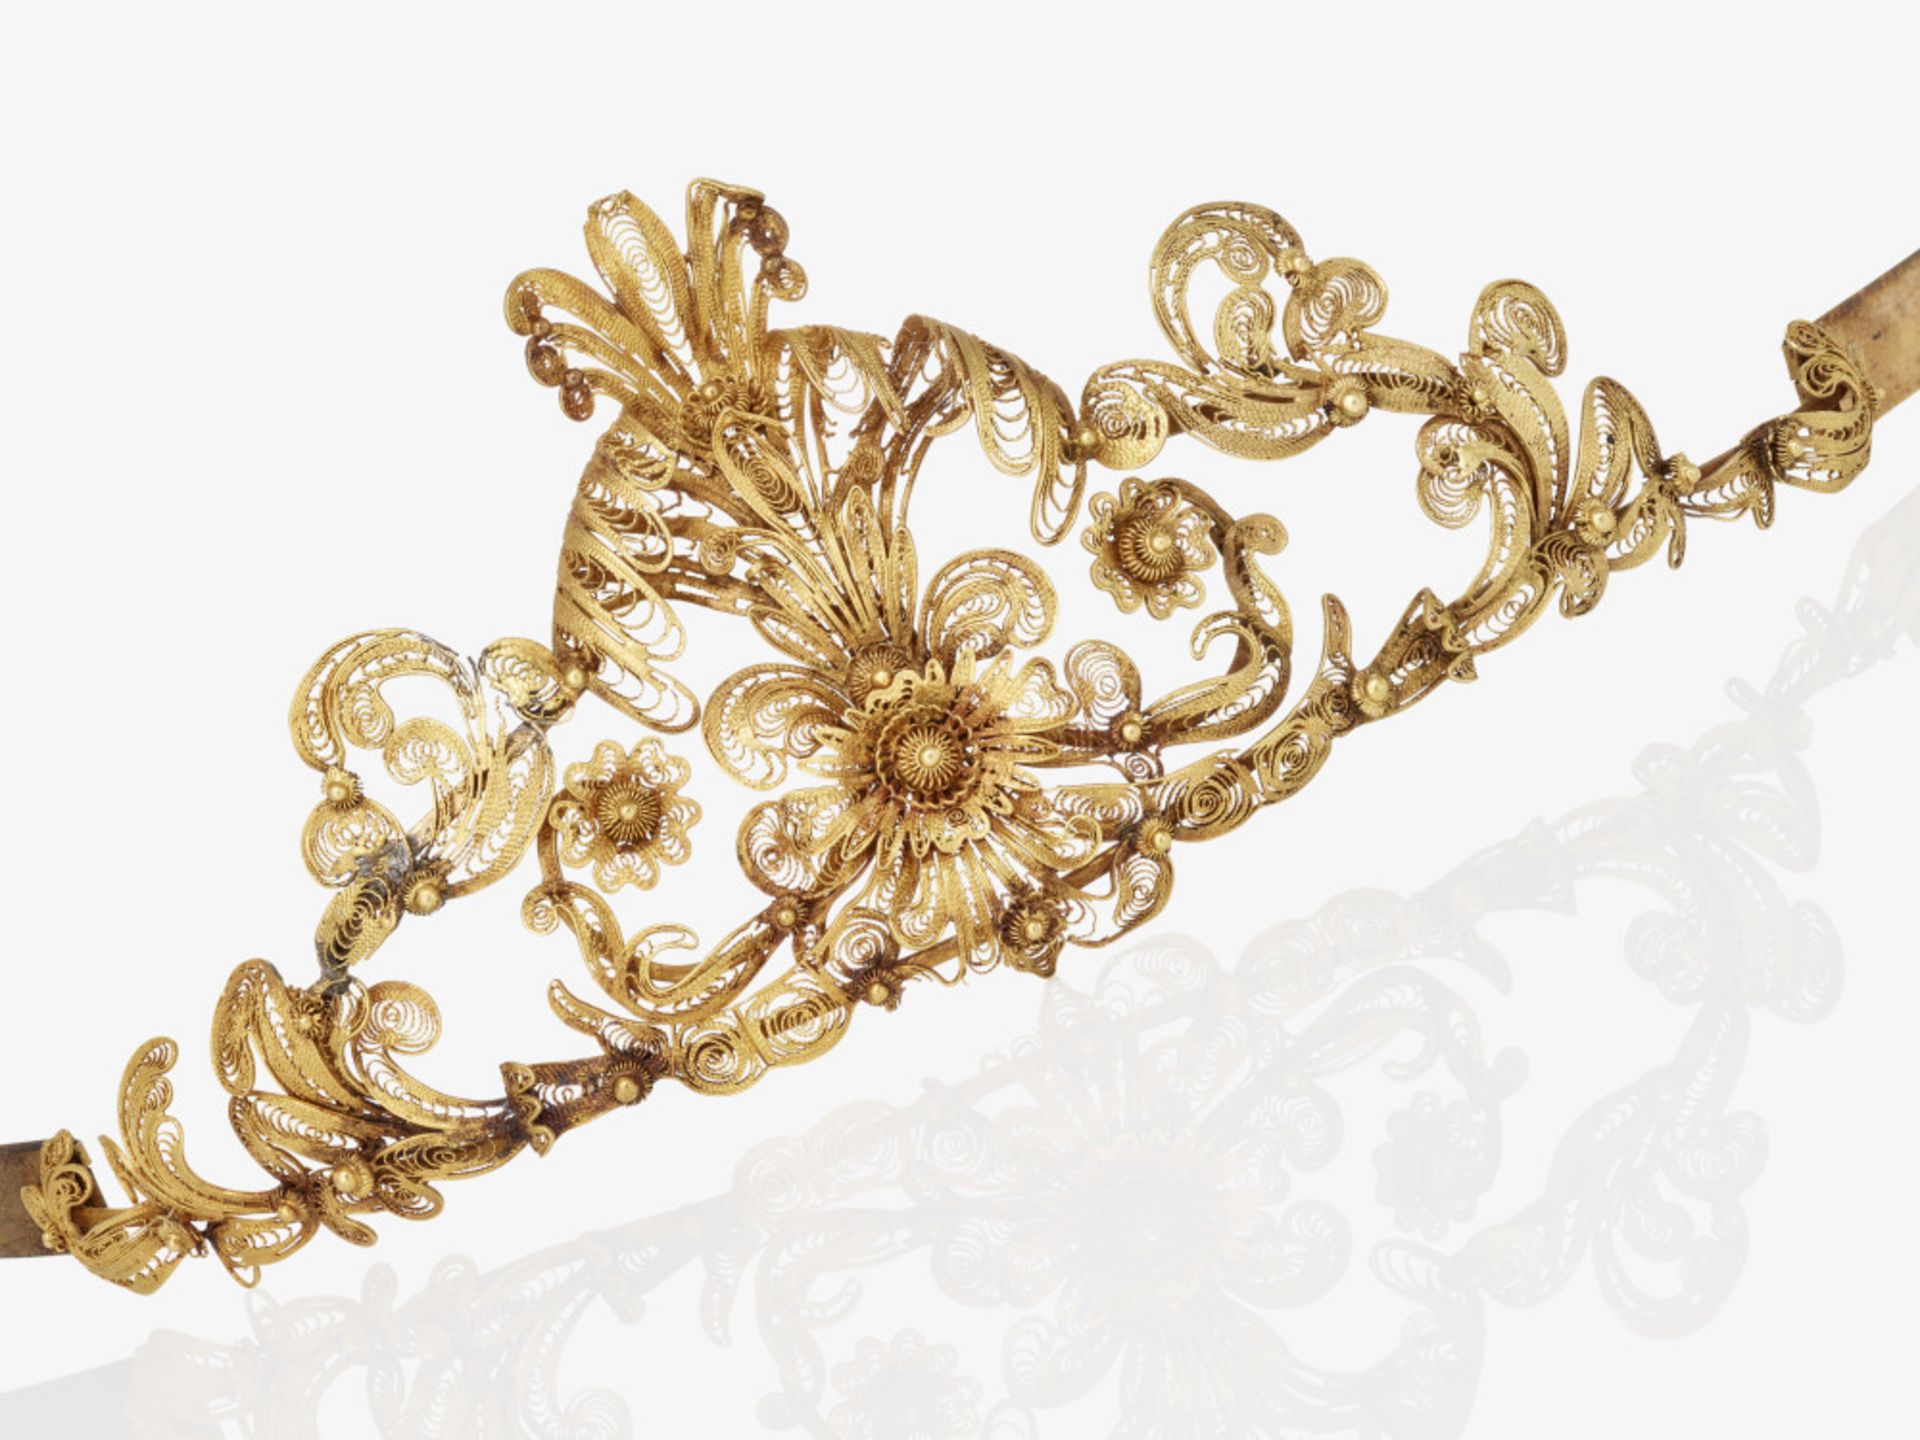 A rare tiara made of gold filigree (cannetille technique) - Probably Germany, circa 1810-1820